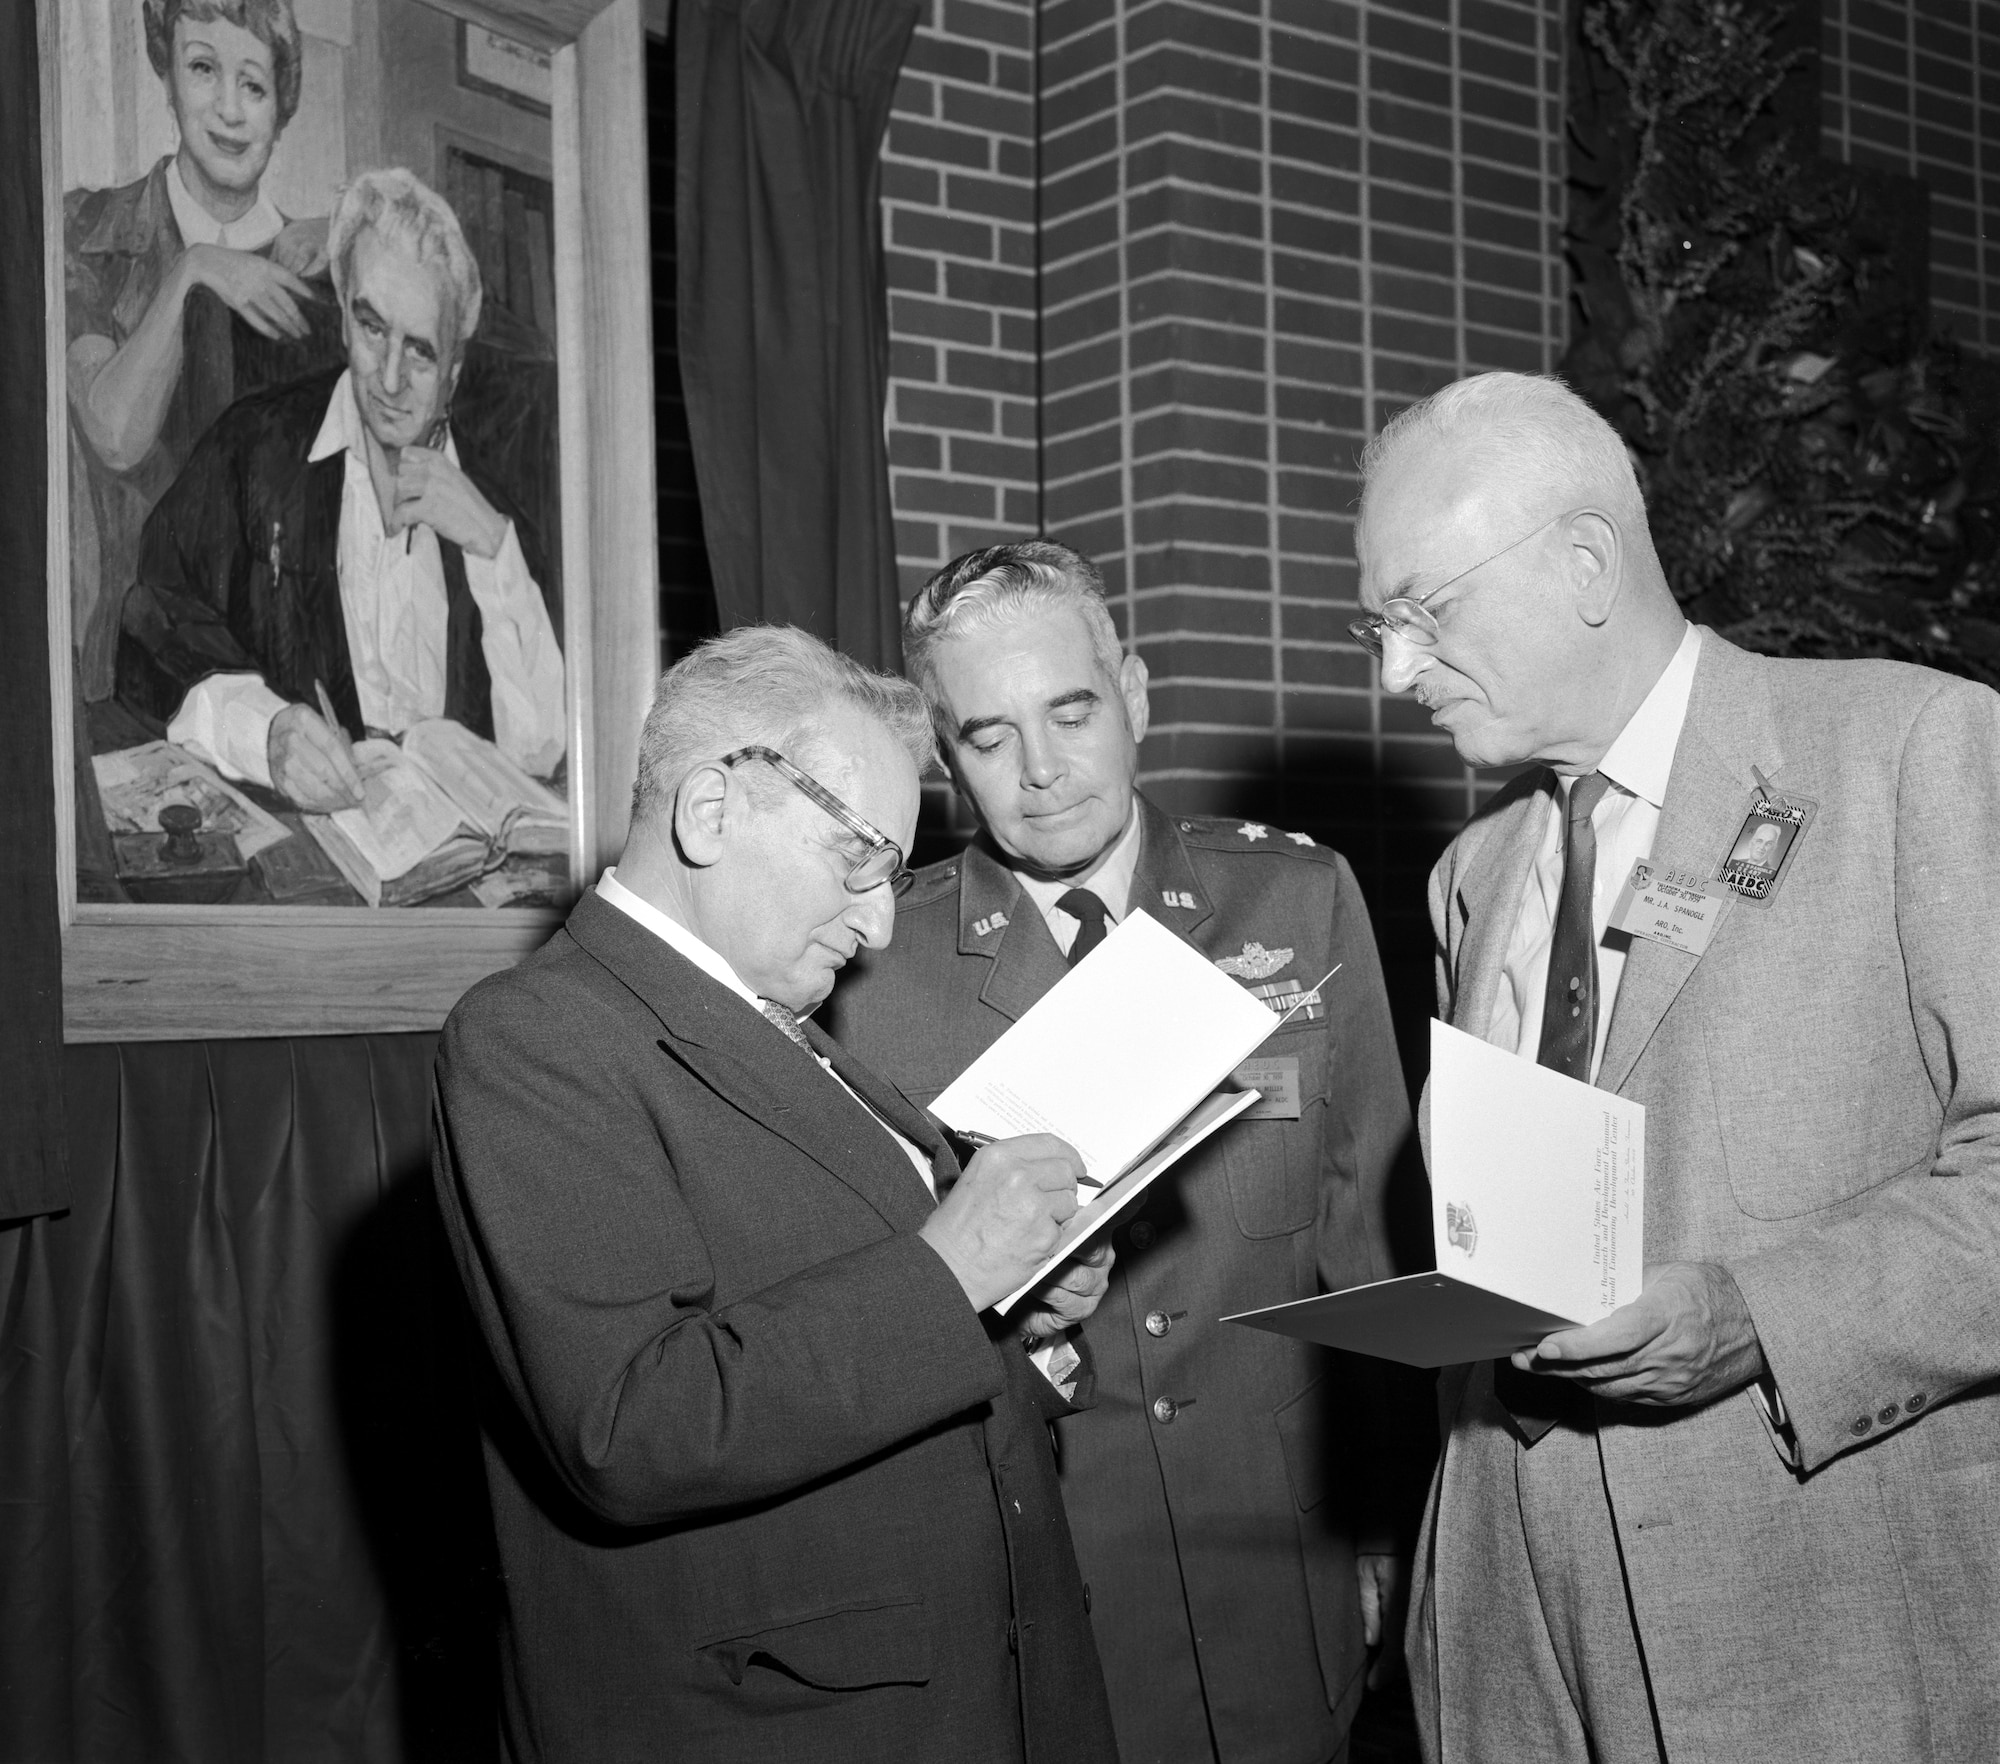 Dr. Theodore von Kármán, left, provides his autograph during a luncheon Oct. 30, 1959, at Arnold Air Force Base, Tenn., while revealing the portrait behind him of him and his sister Dr. Joesphine de Kármán. Also pictured is then-Maj. Gen. Troup Miller Jr., then-commander of Arnold Engineering Development Center, and J.A. Spanogle with the Arnold Research Organization. (U.S. Air Force photo)